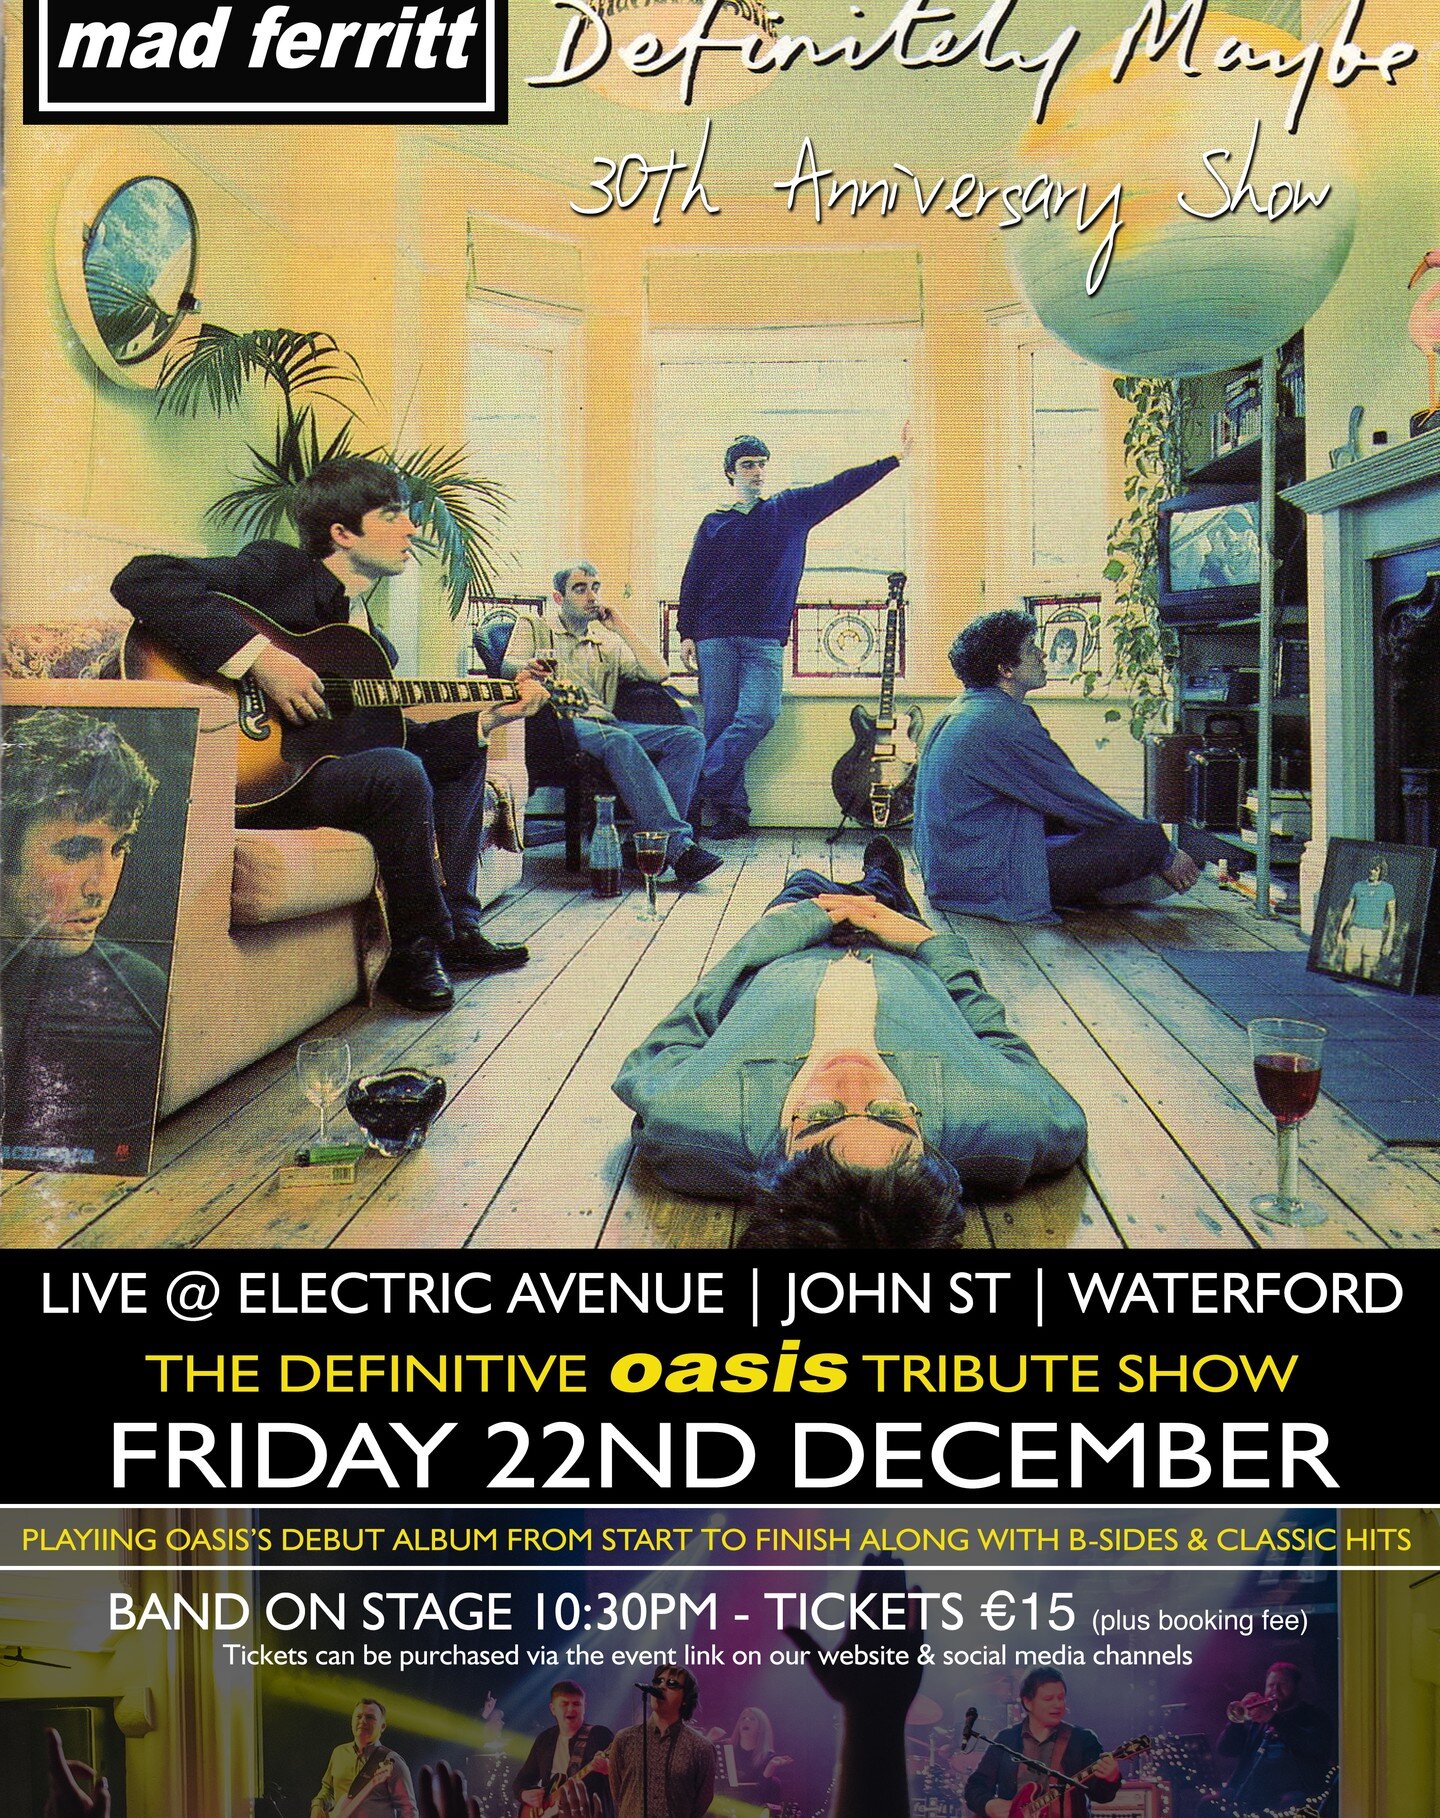 GIG ANNOUNCEMENT
We are delighted to announce that we will be closing out 2023 by playing a special show to celebrate the upcoming 30th anniversary of 'Definitely Maybe' Live @electric.avenue__, John's Street, Waterford on Friday 22nd December. We wi